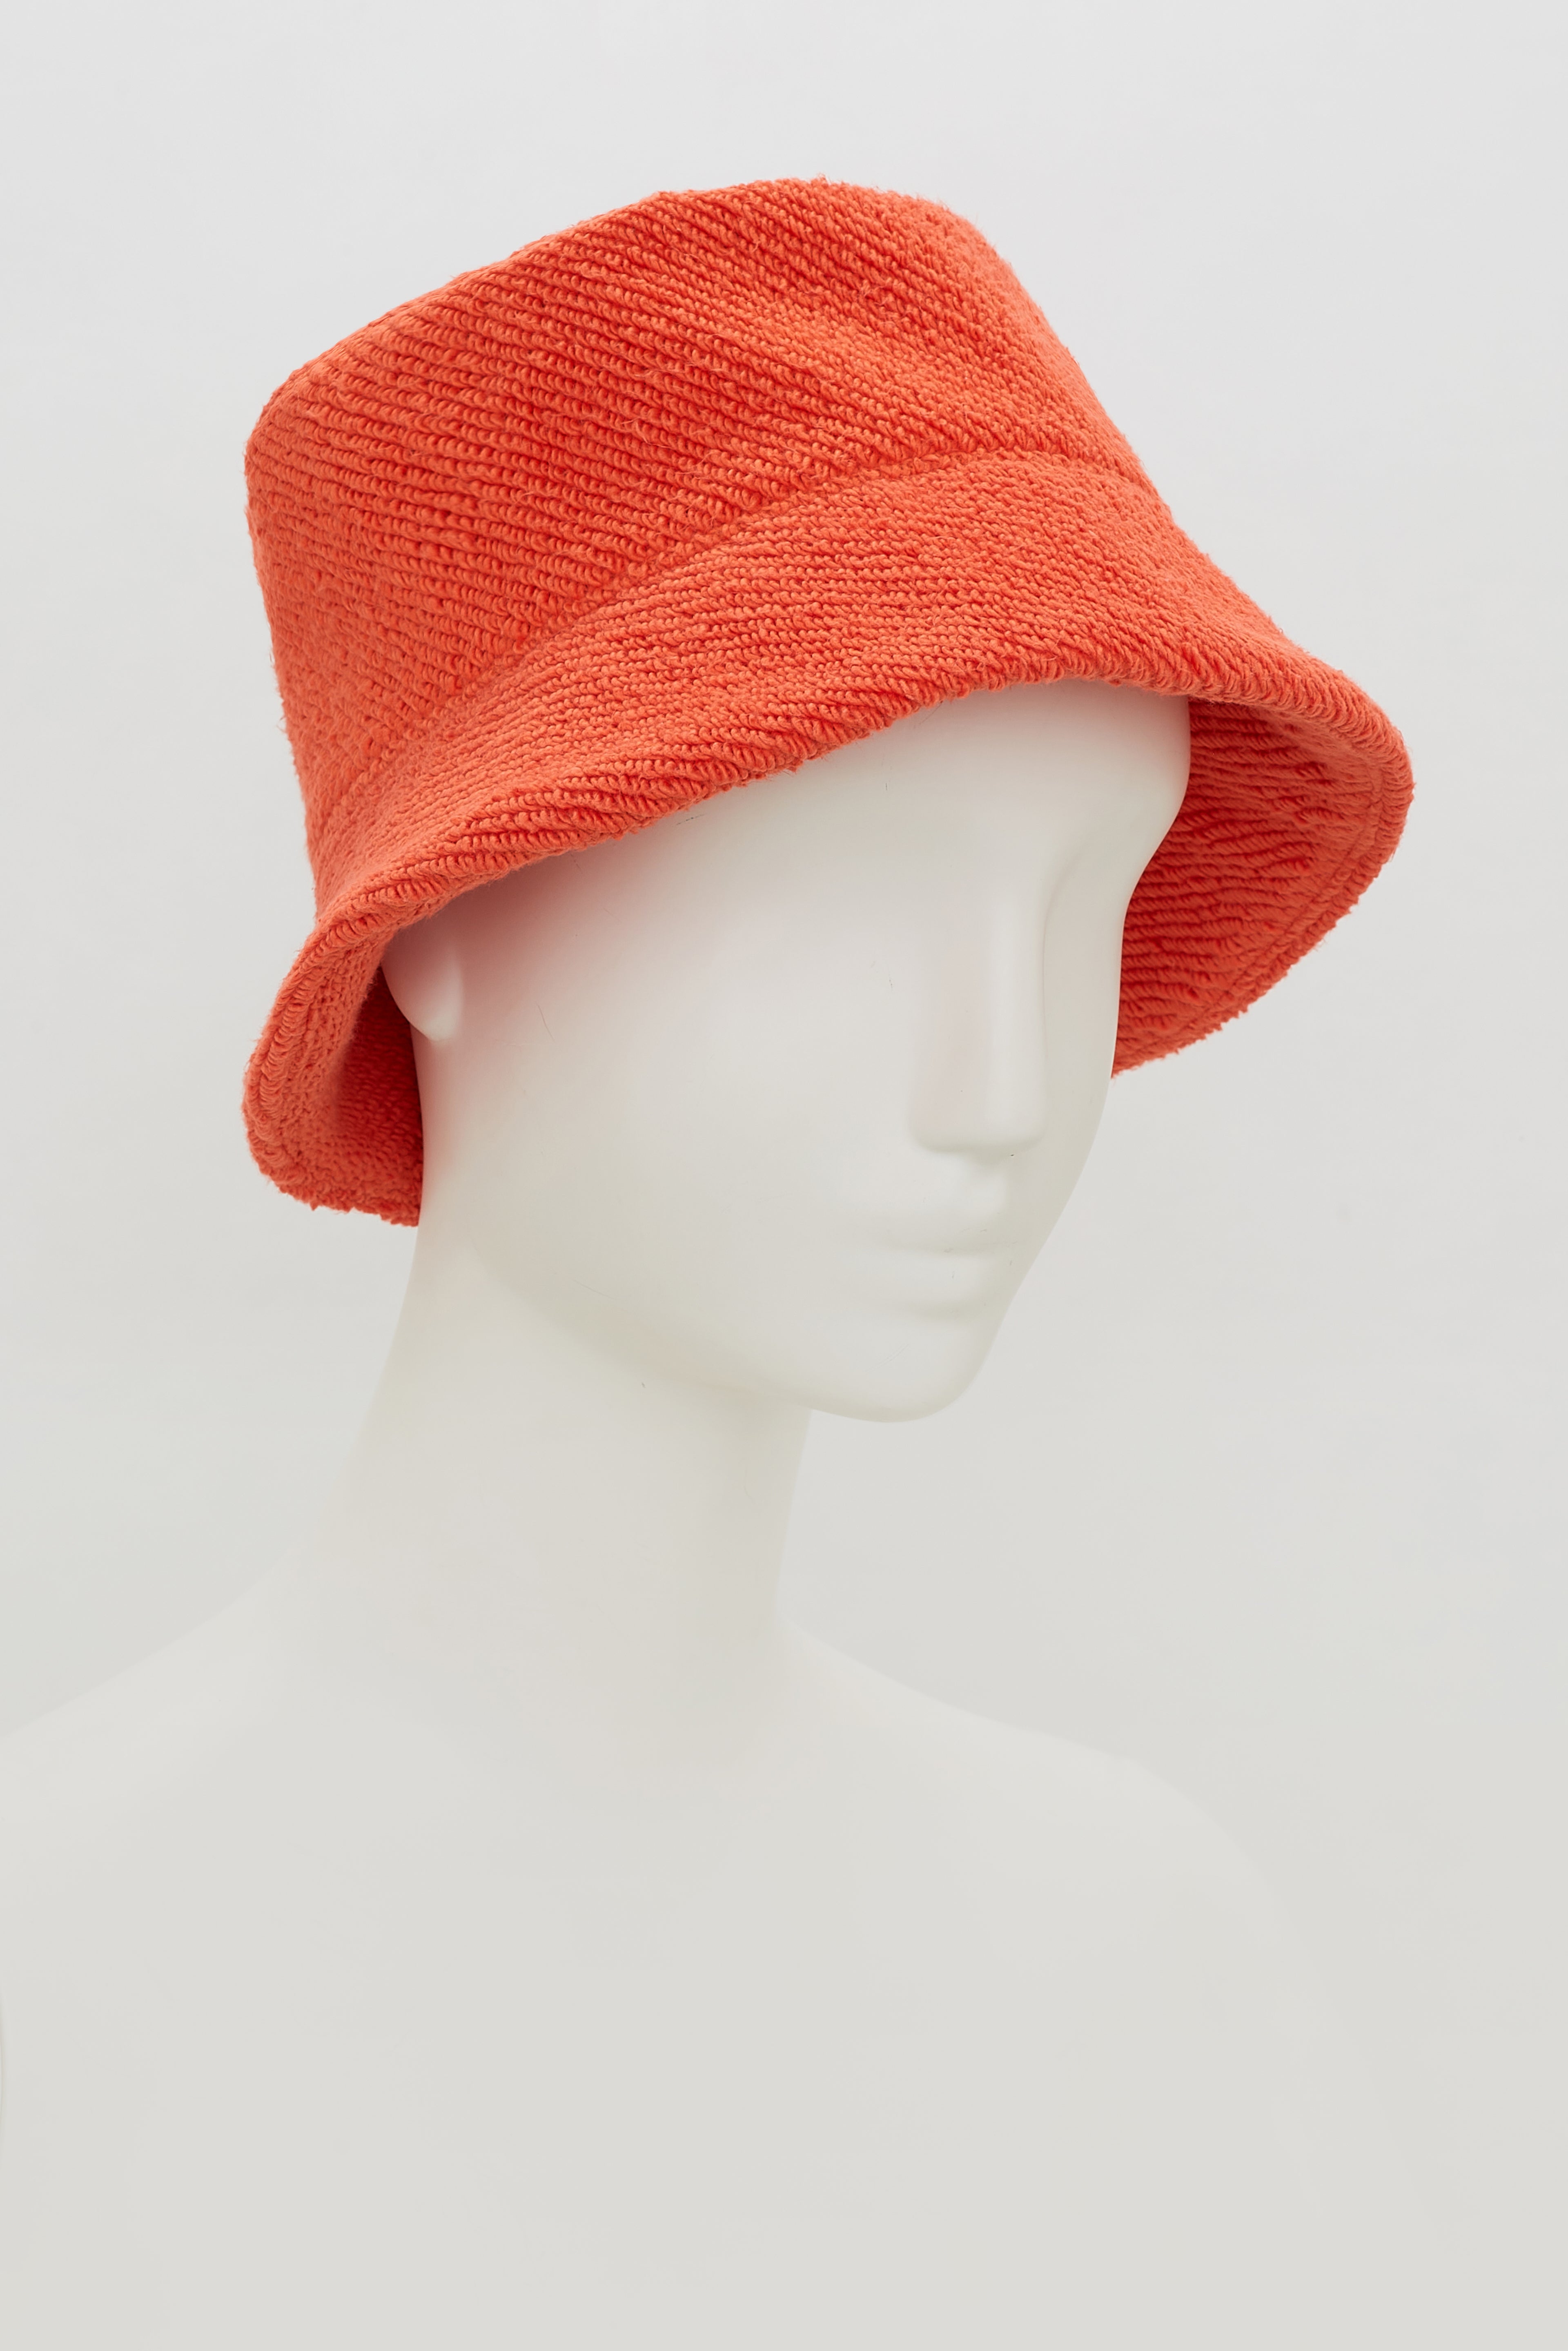 Dorothee-Schumacher-OUTLET-SALE-MODERN-TOWELLING-hat-Accessoires-OS-spiced-orange-ARCHIVE-COLLECTION-2.jpg